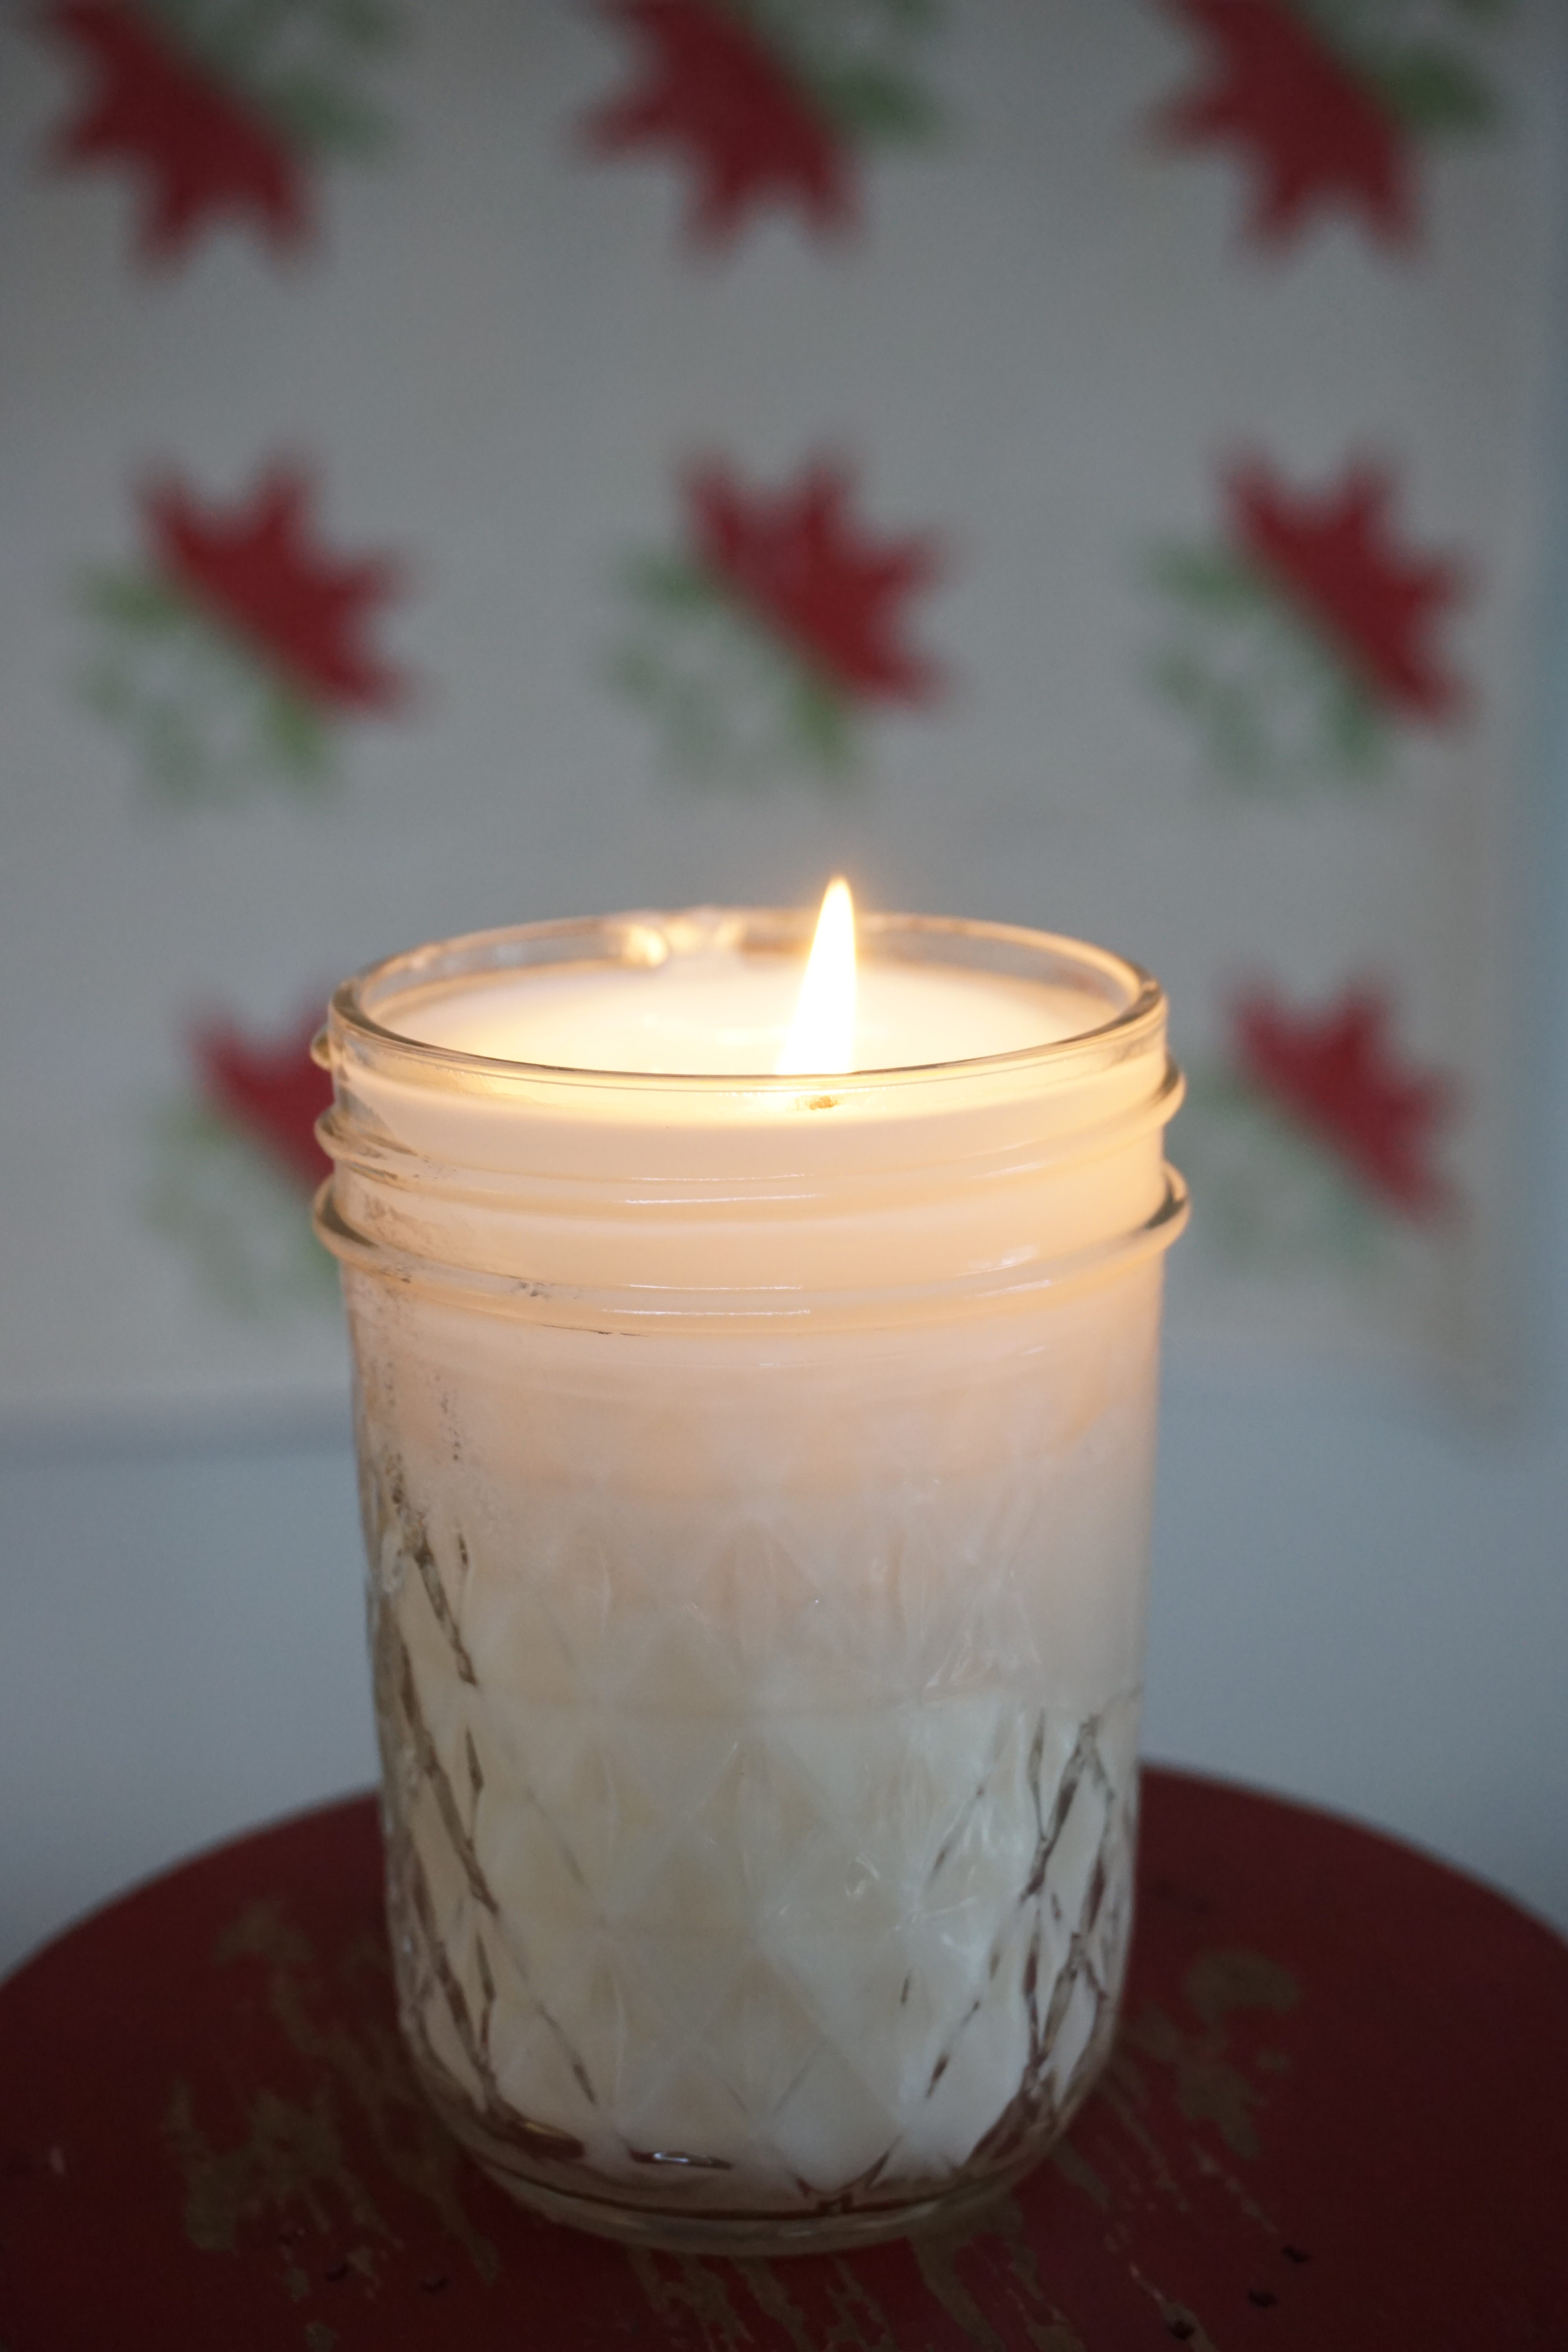 Easy Soy Wax Candles - DYI How To Make Soy Candles